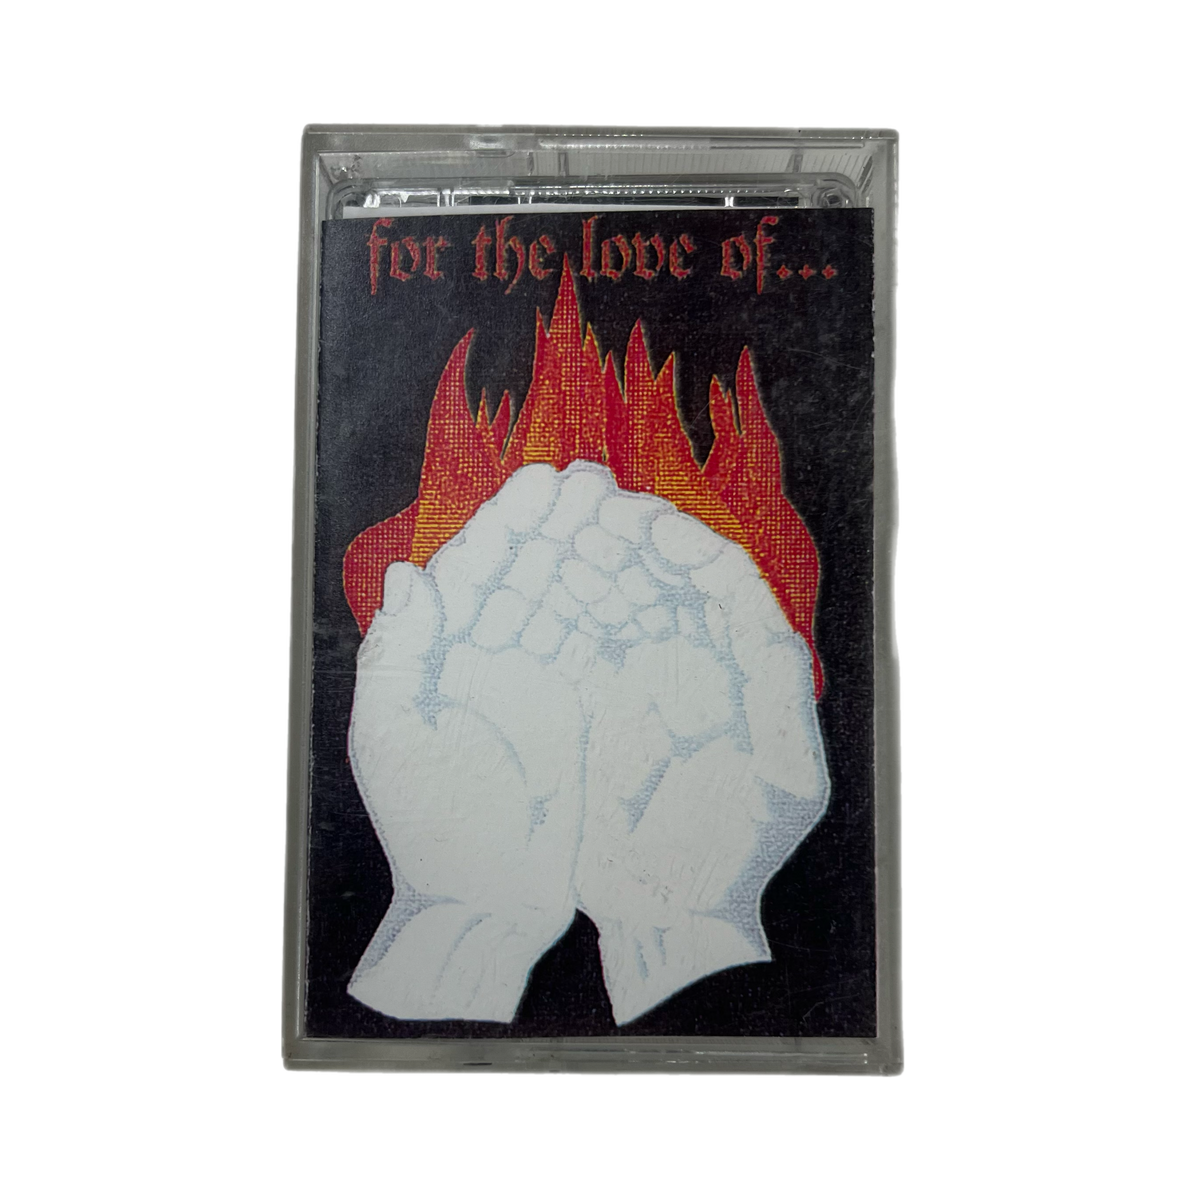 Vintage For The Love Of &quot;For The Love Of...&quot; Cassette Tape